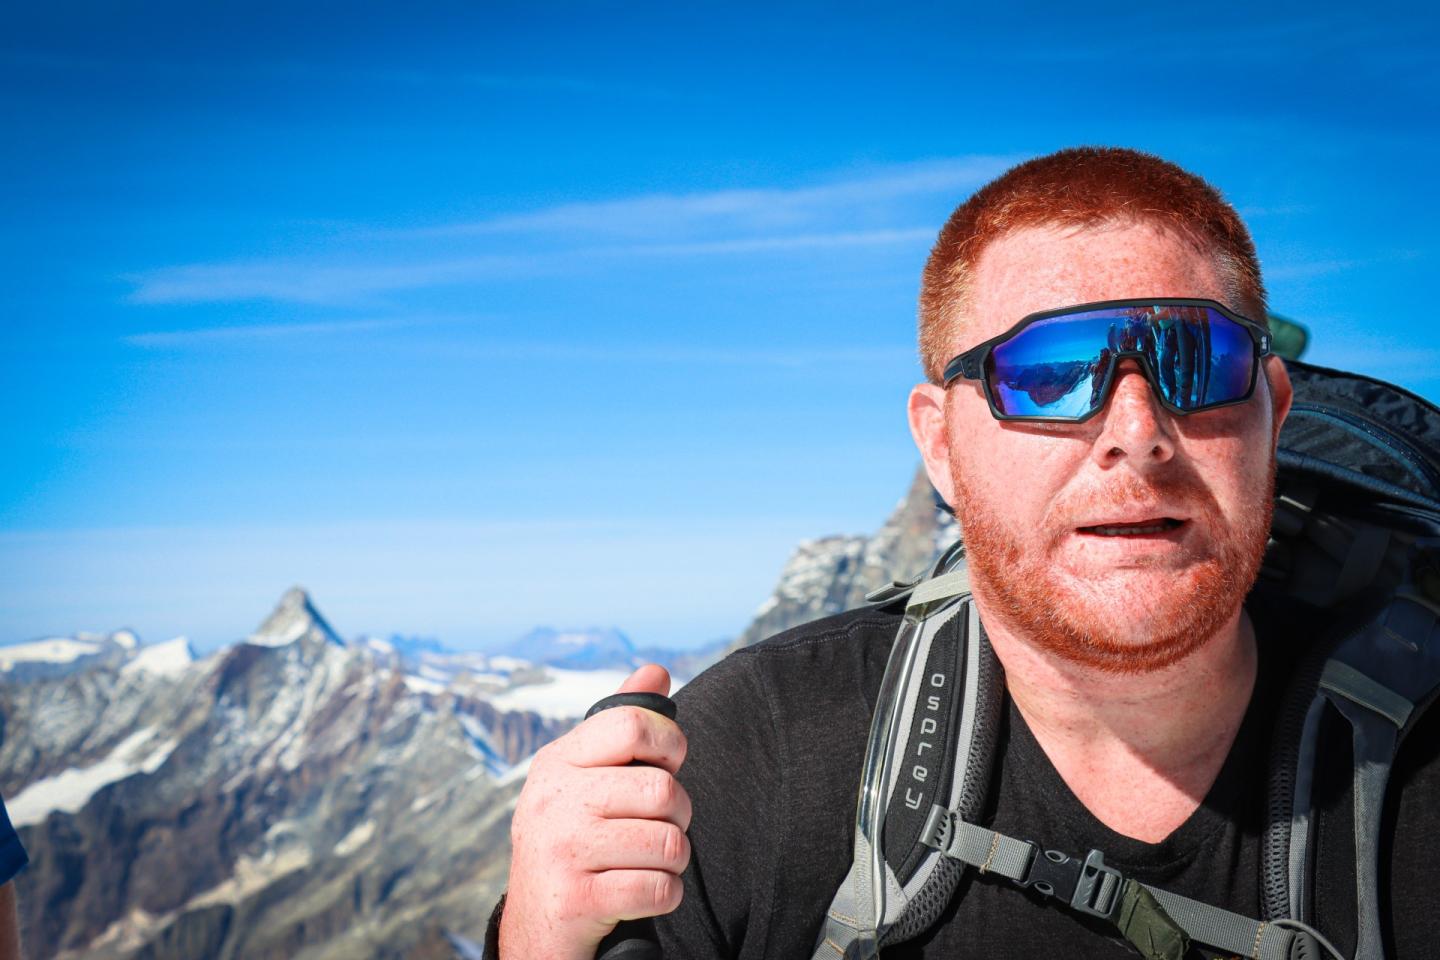 colour photo of a man with red hair and beard, with sky and mountains behind, as he is climbing.